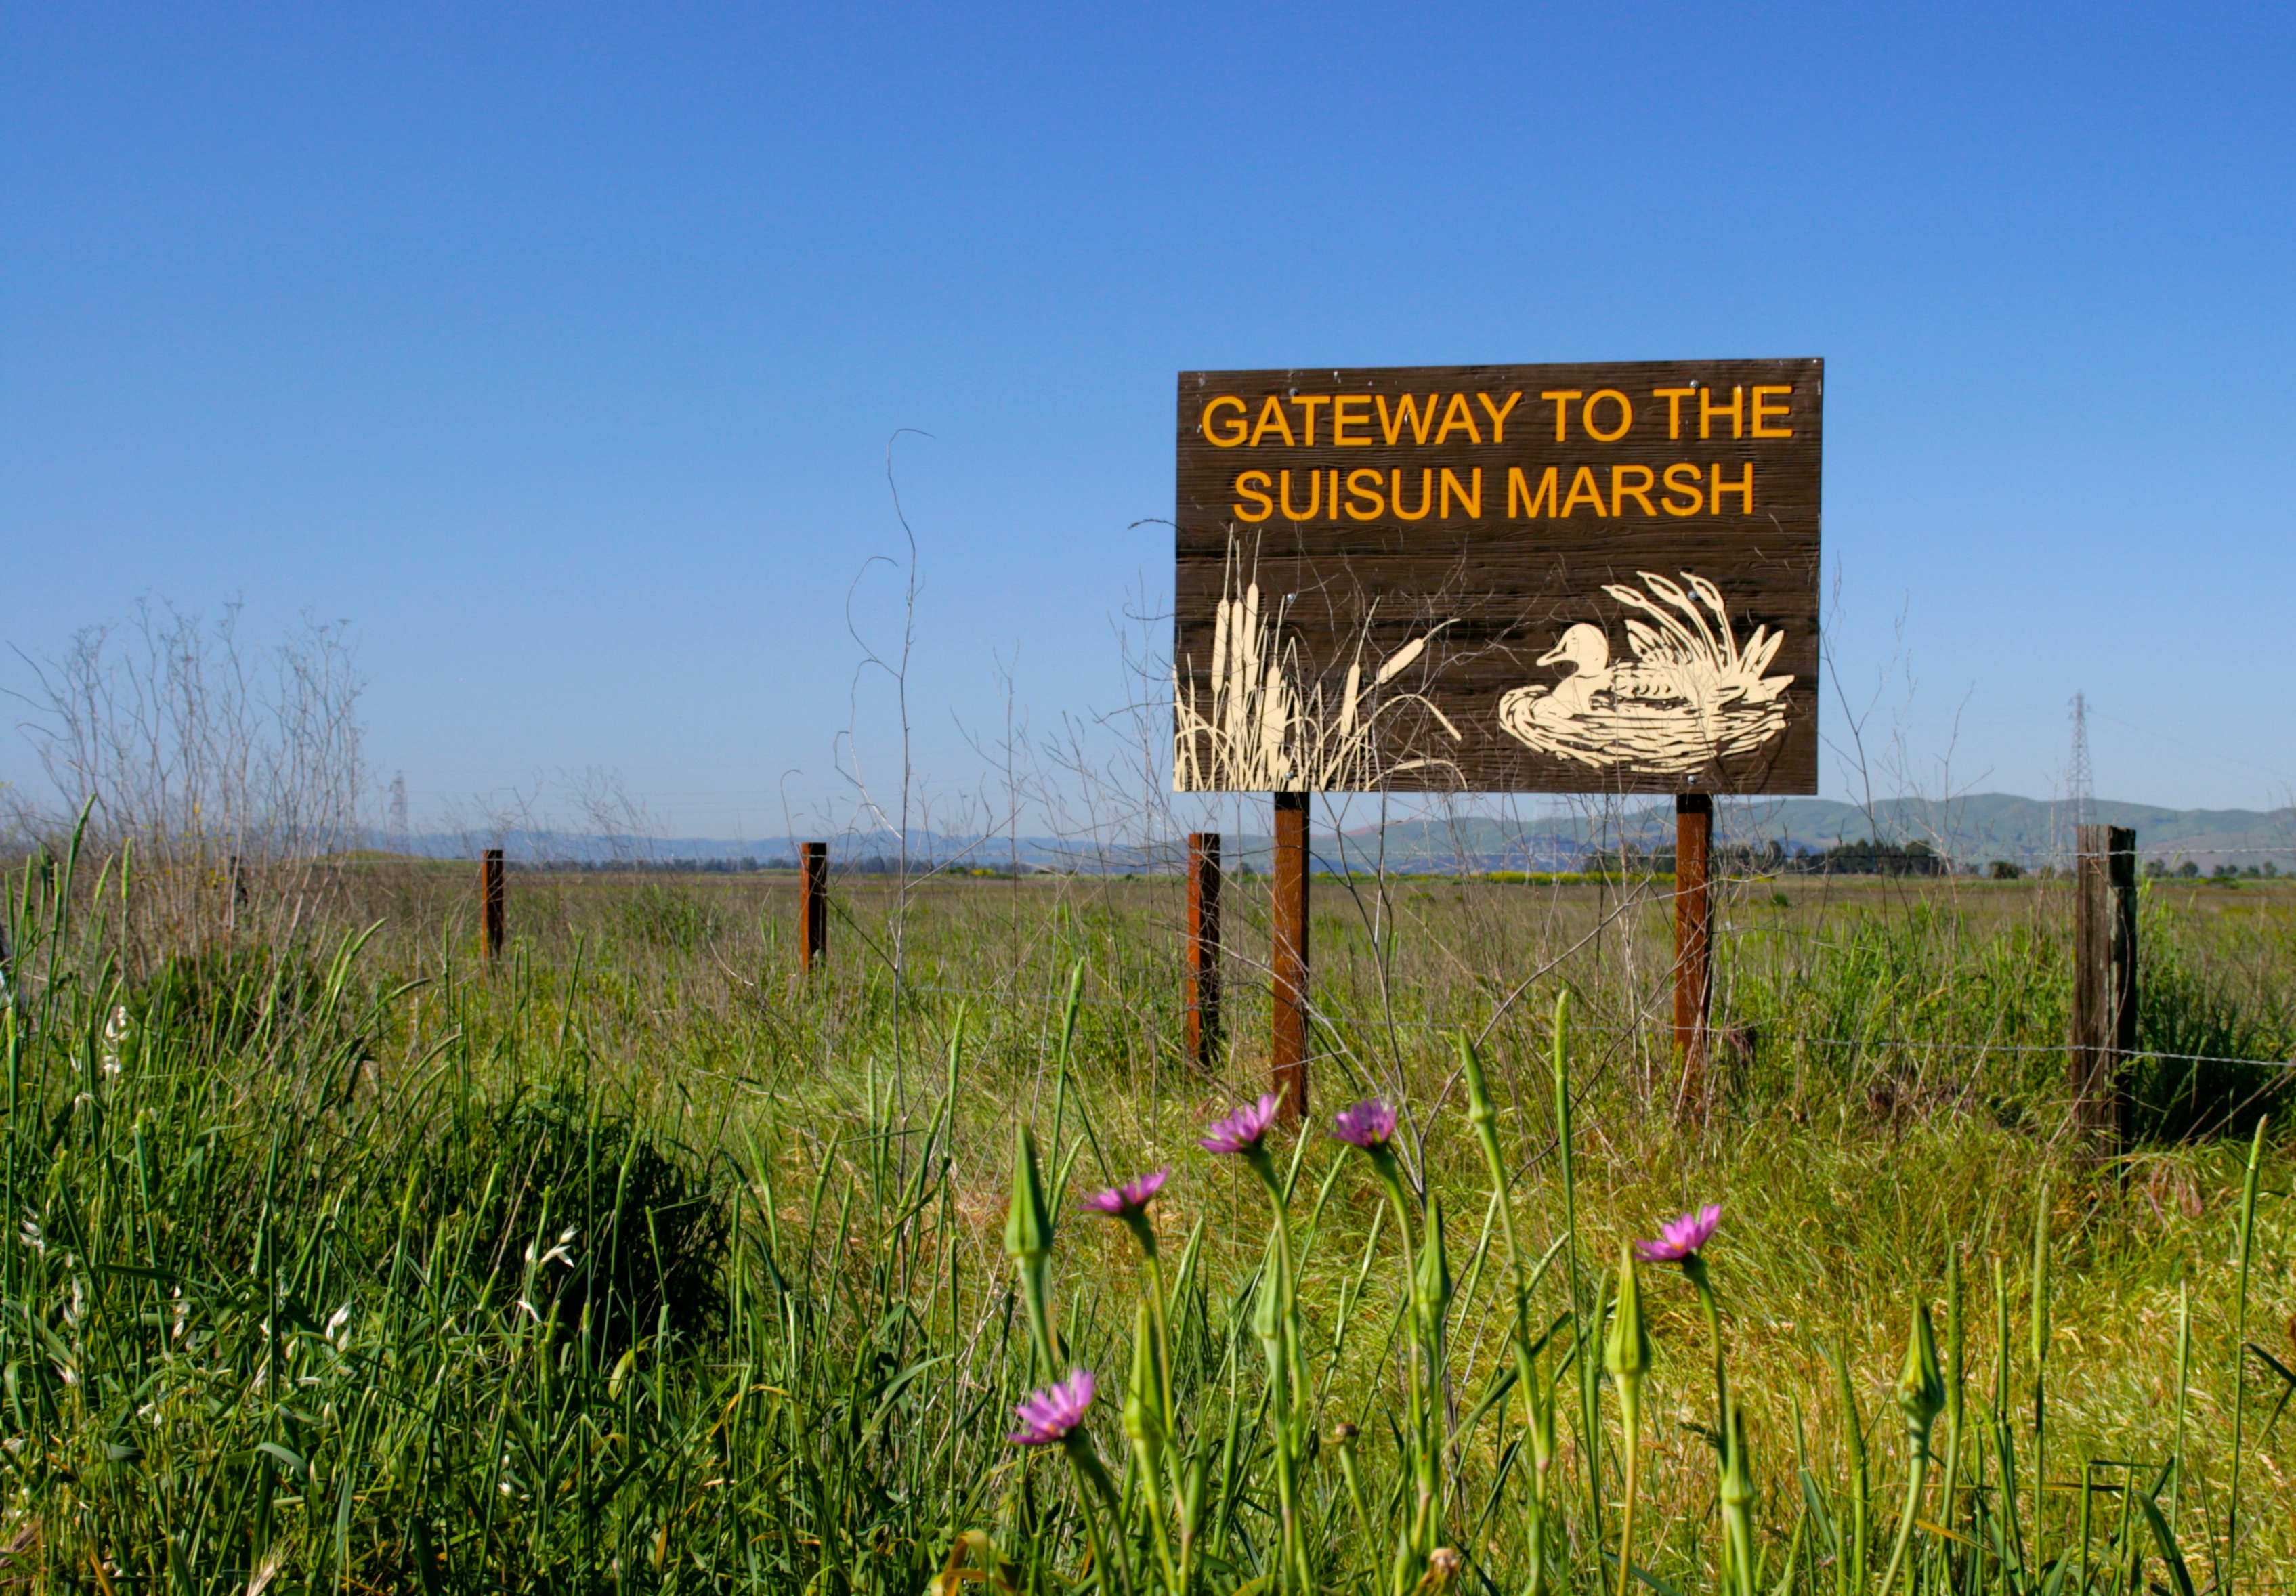 The gateway to the Suisun Marsh along Grizzly Island Rd.